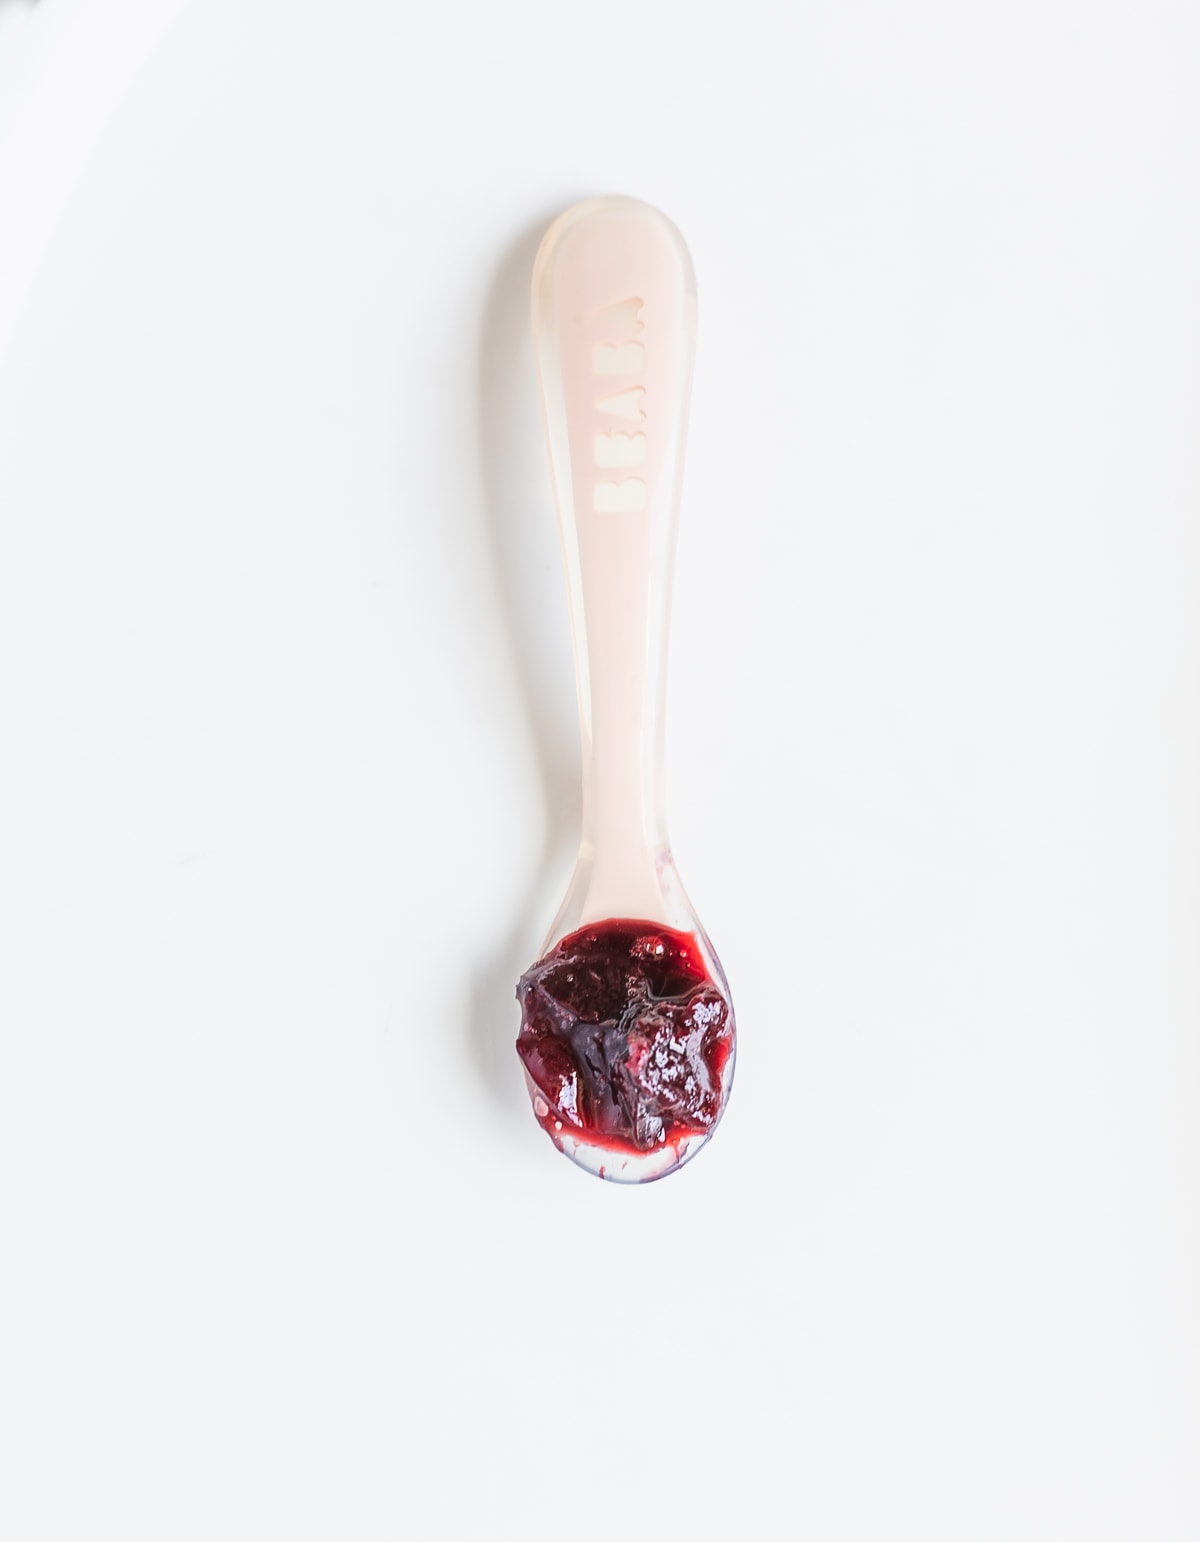 cherry compote on a pink baby spoon.